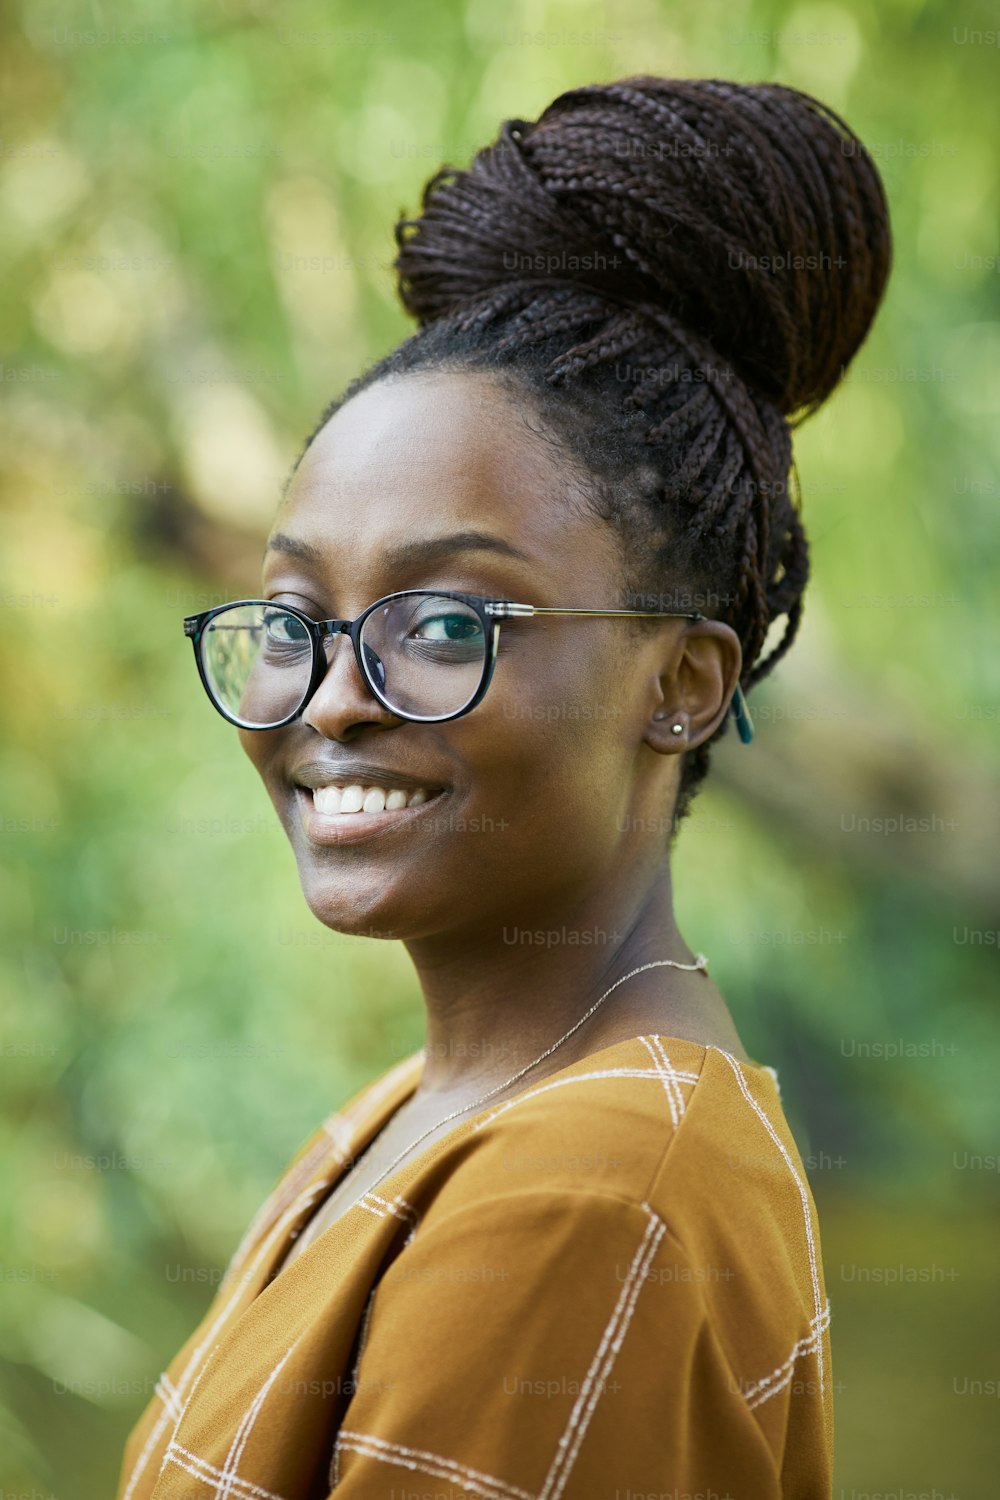 Vertical portrait of young African-American woman wearing glasses and smiling at camera outdoors in park